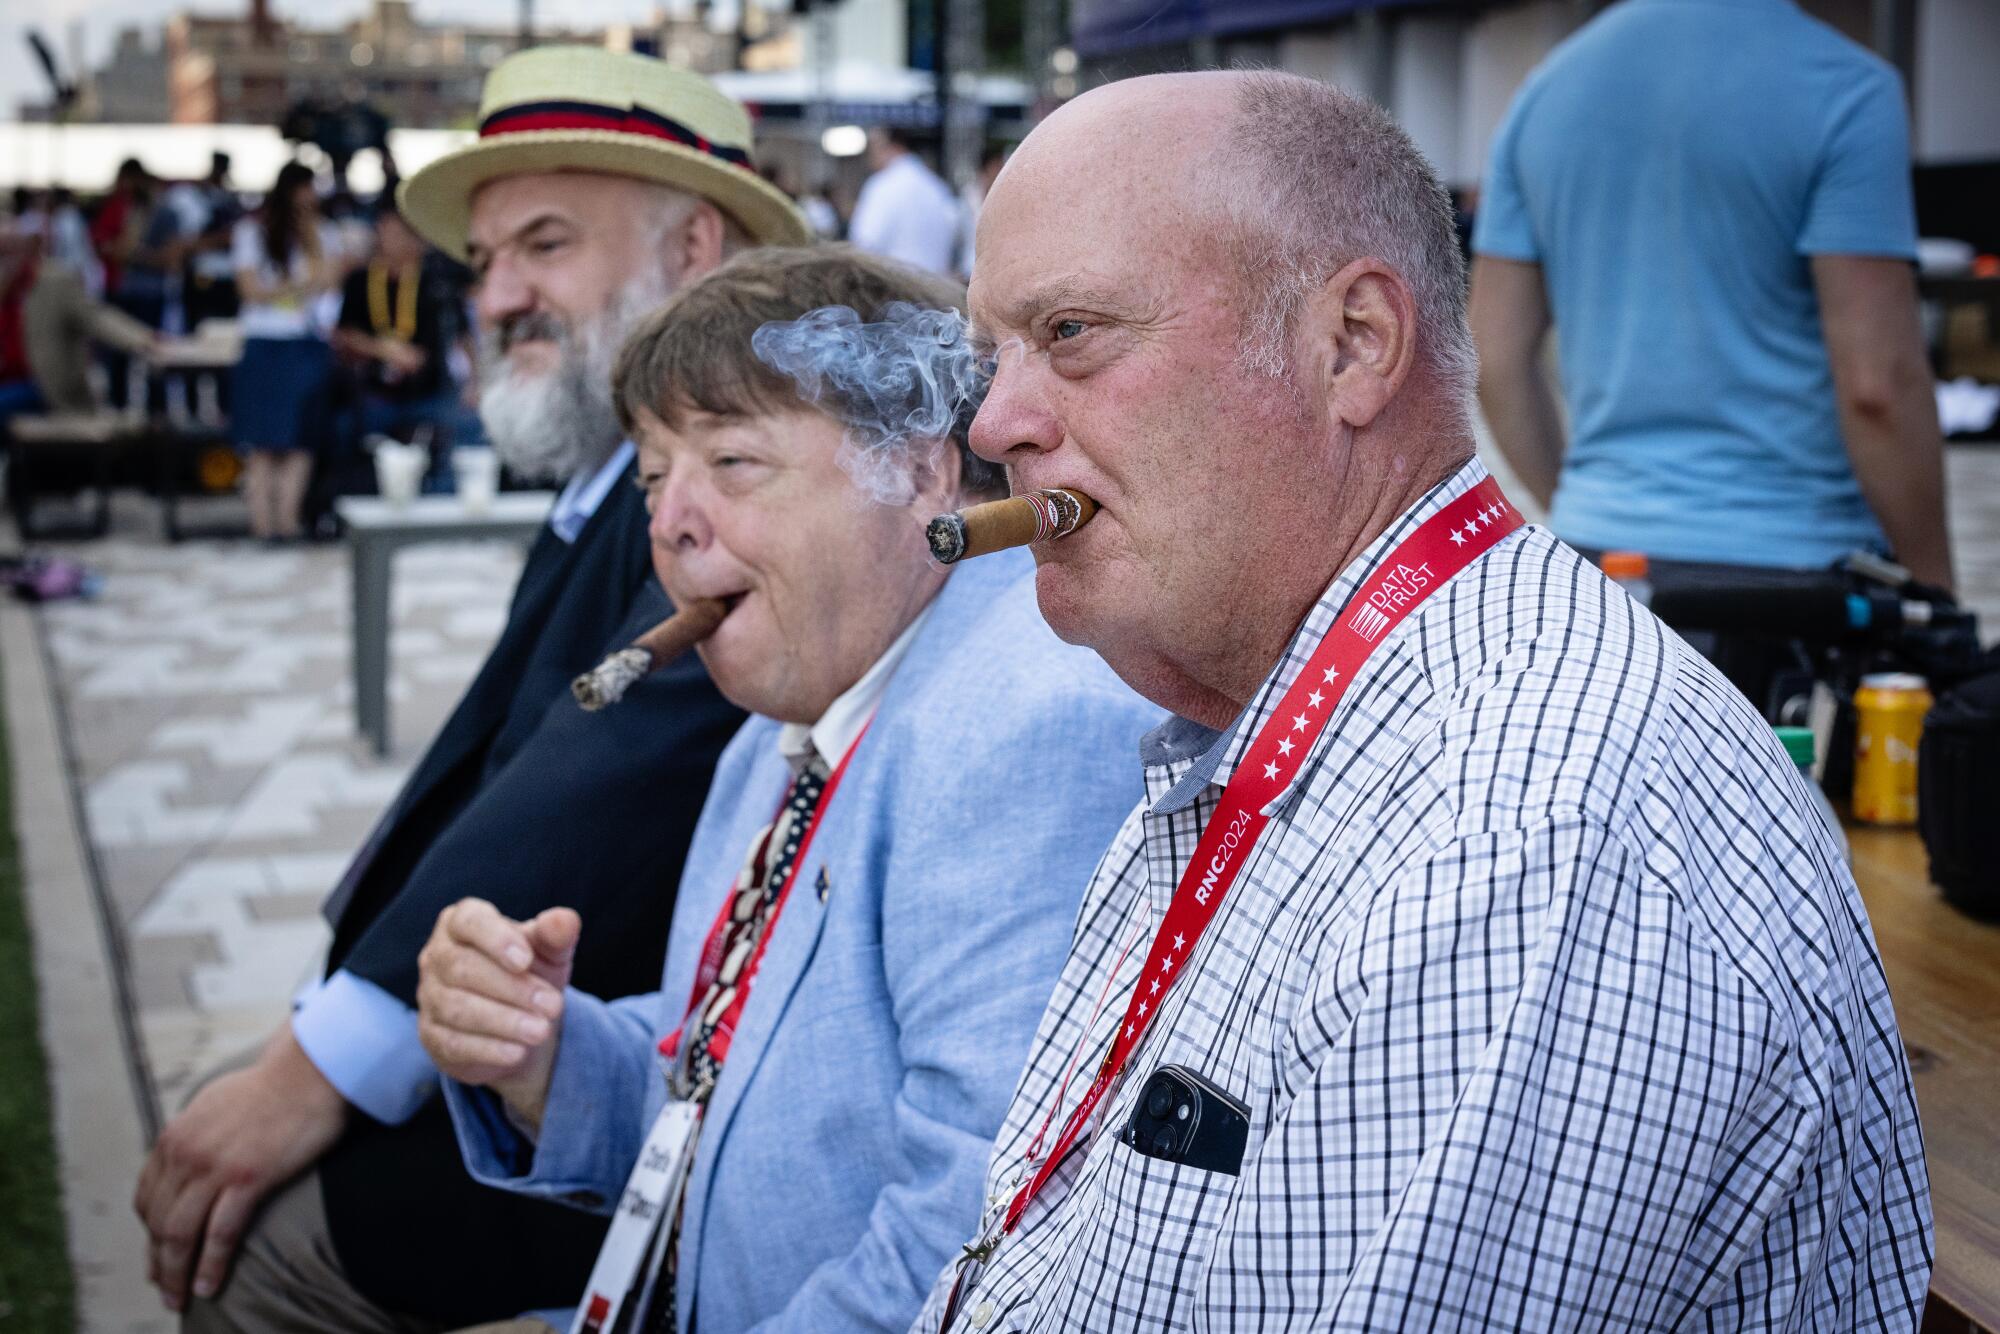 From right - Bill Henney, Charlie O'Connor and Gerald Bergen, sit outside the RNC and enjoy cigars.